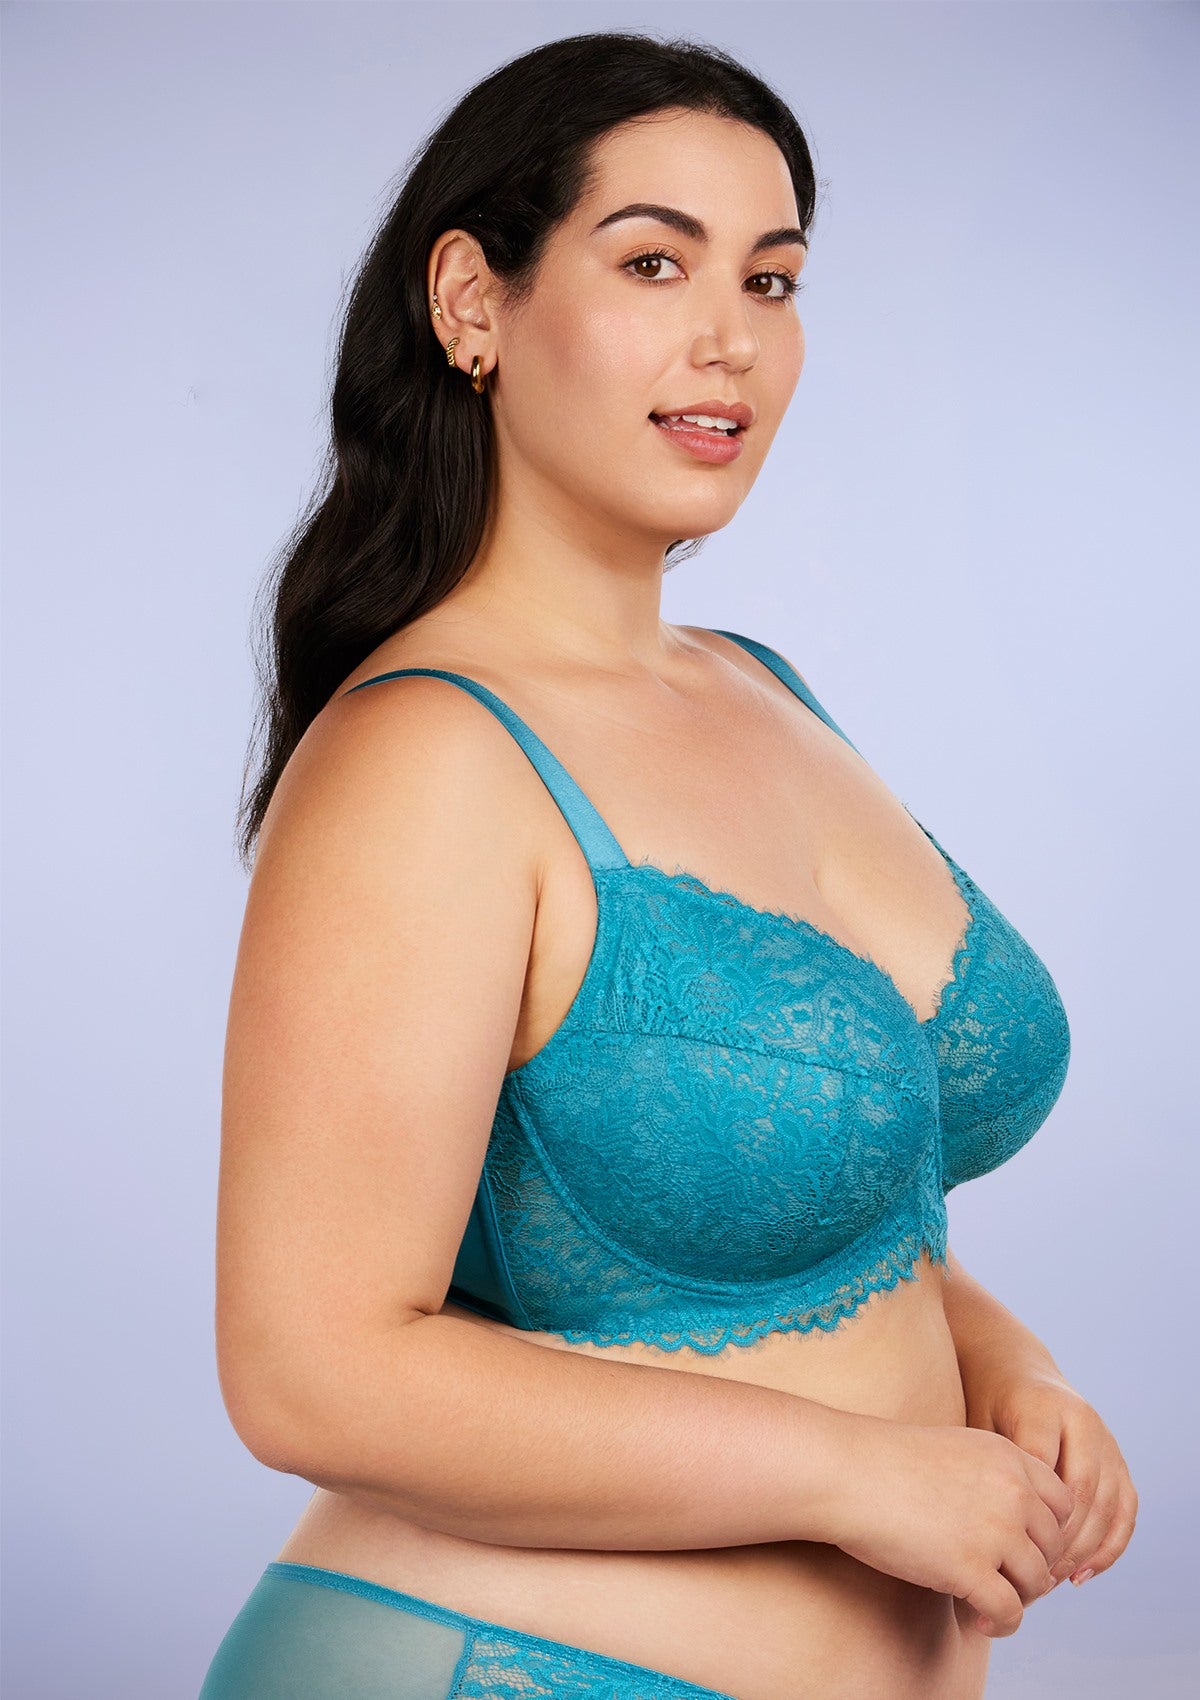 HSIA Sunflower Unlined Lace Bra: Best Bra For Wide Set Breasts - Horizon Blue / 34 / C